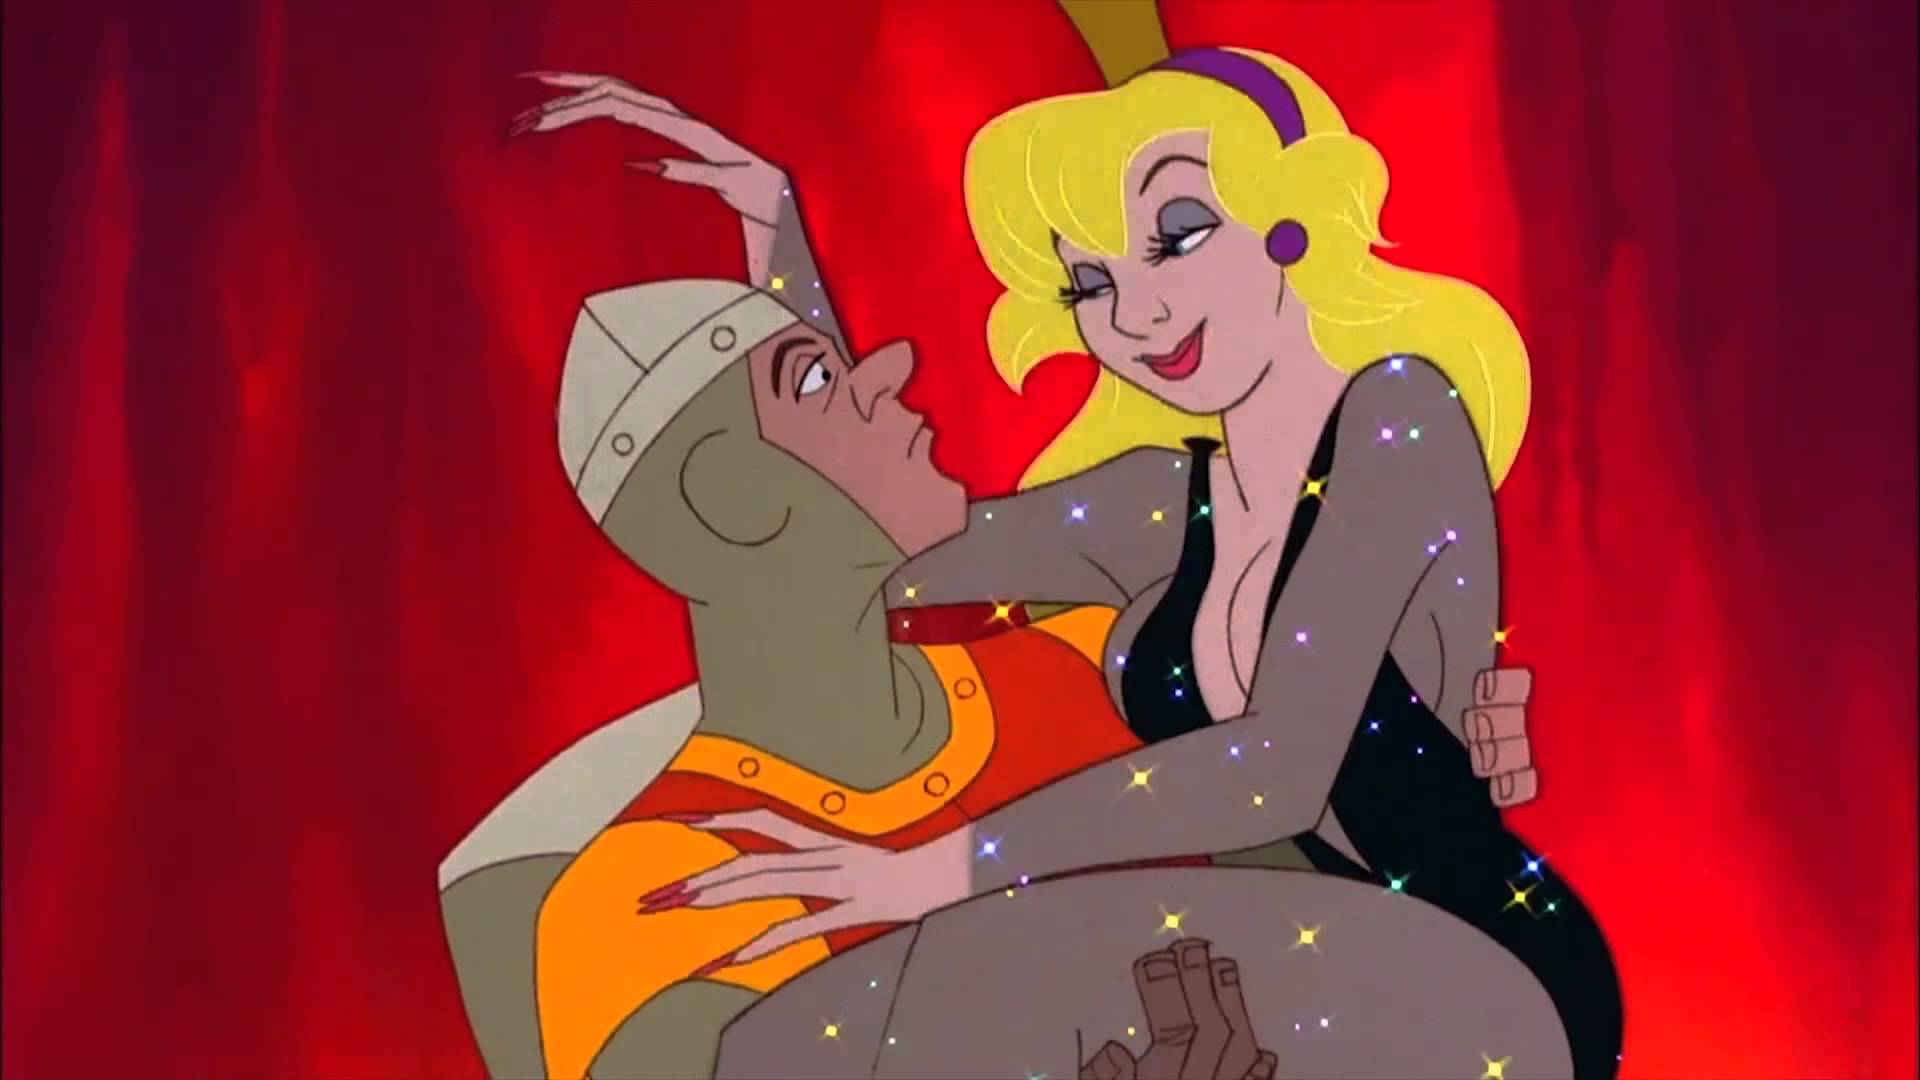 Fundraiser for “Dragon’s Lair” Movie Announced - New Game Only A Possibility 